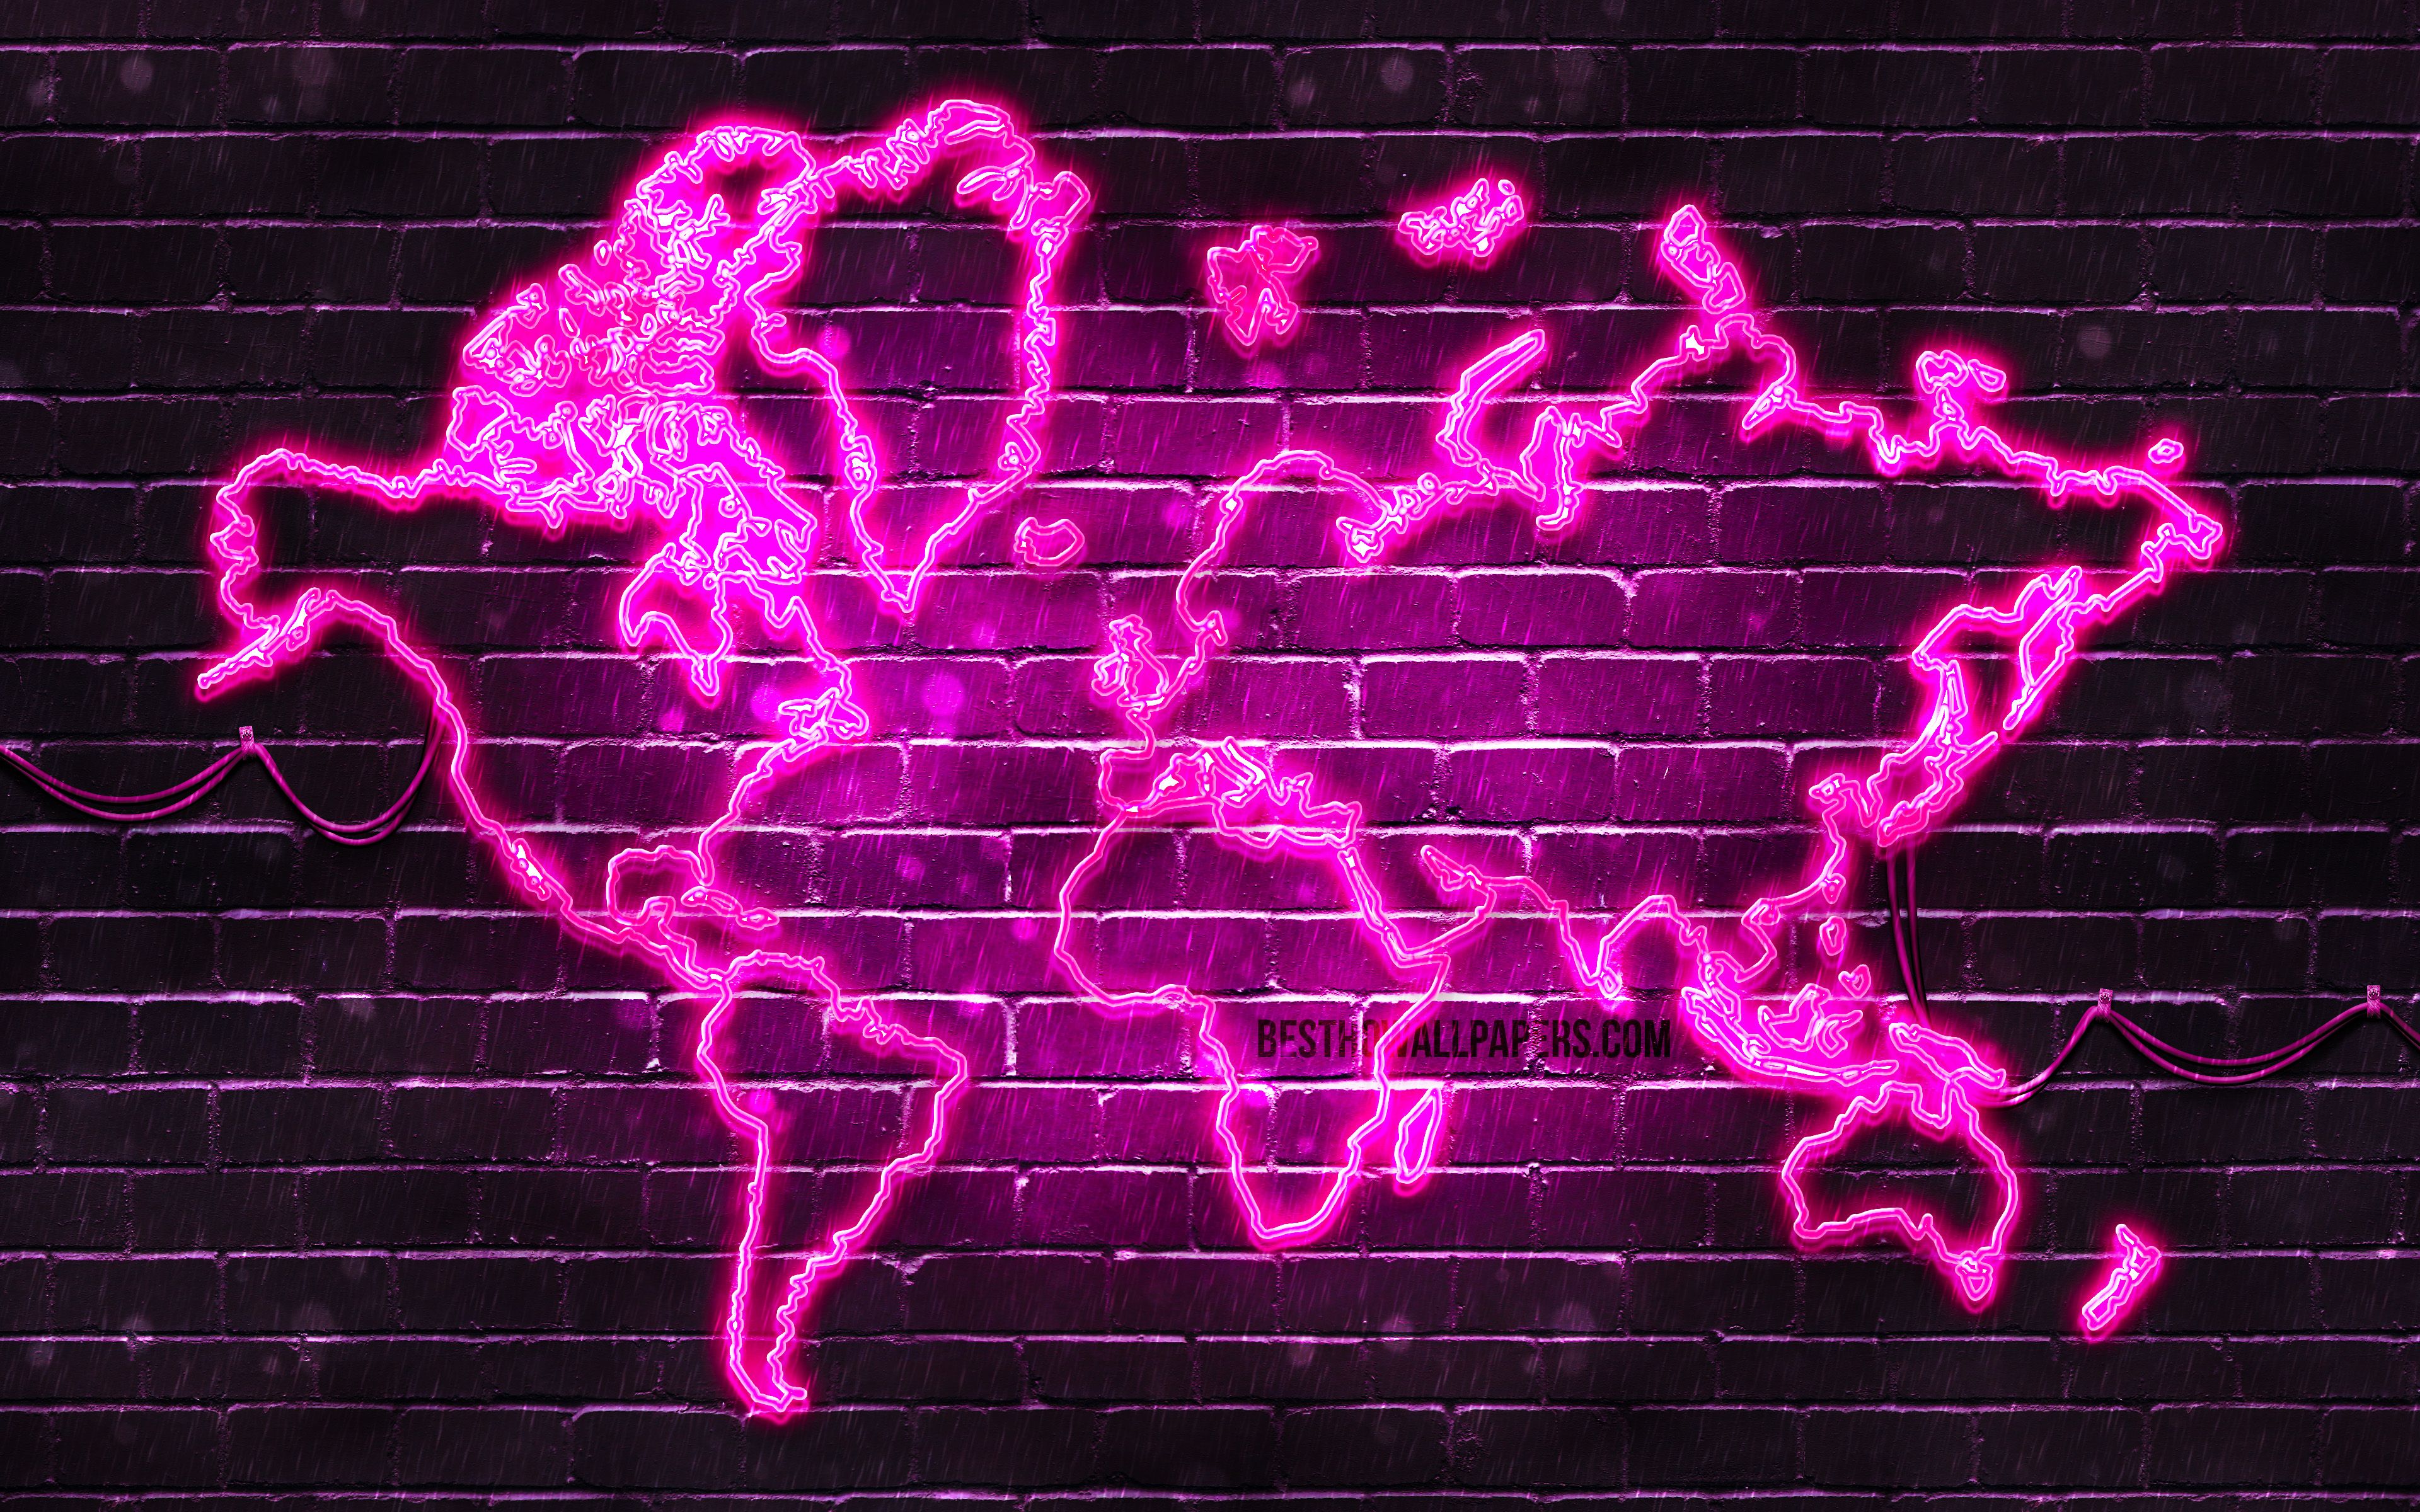 Download wallpaper Purple neon World Map, 4k, purple brickwall, World Map Concept, Purple World Map, World Maps for desktop with resolution 3840x2400. High Quality HD picture wallpaper